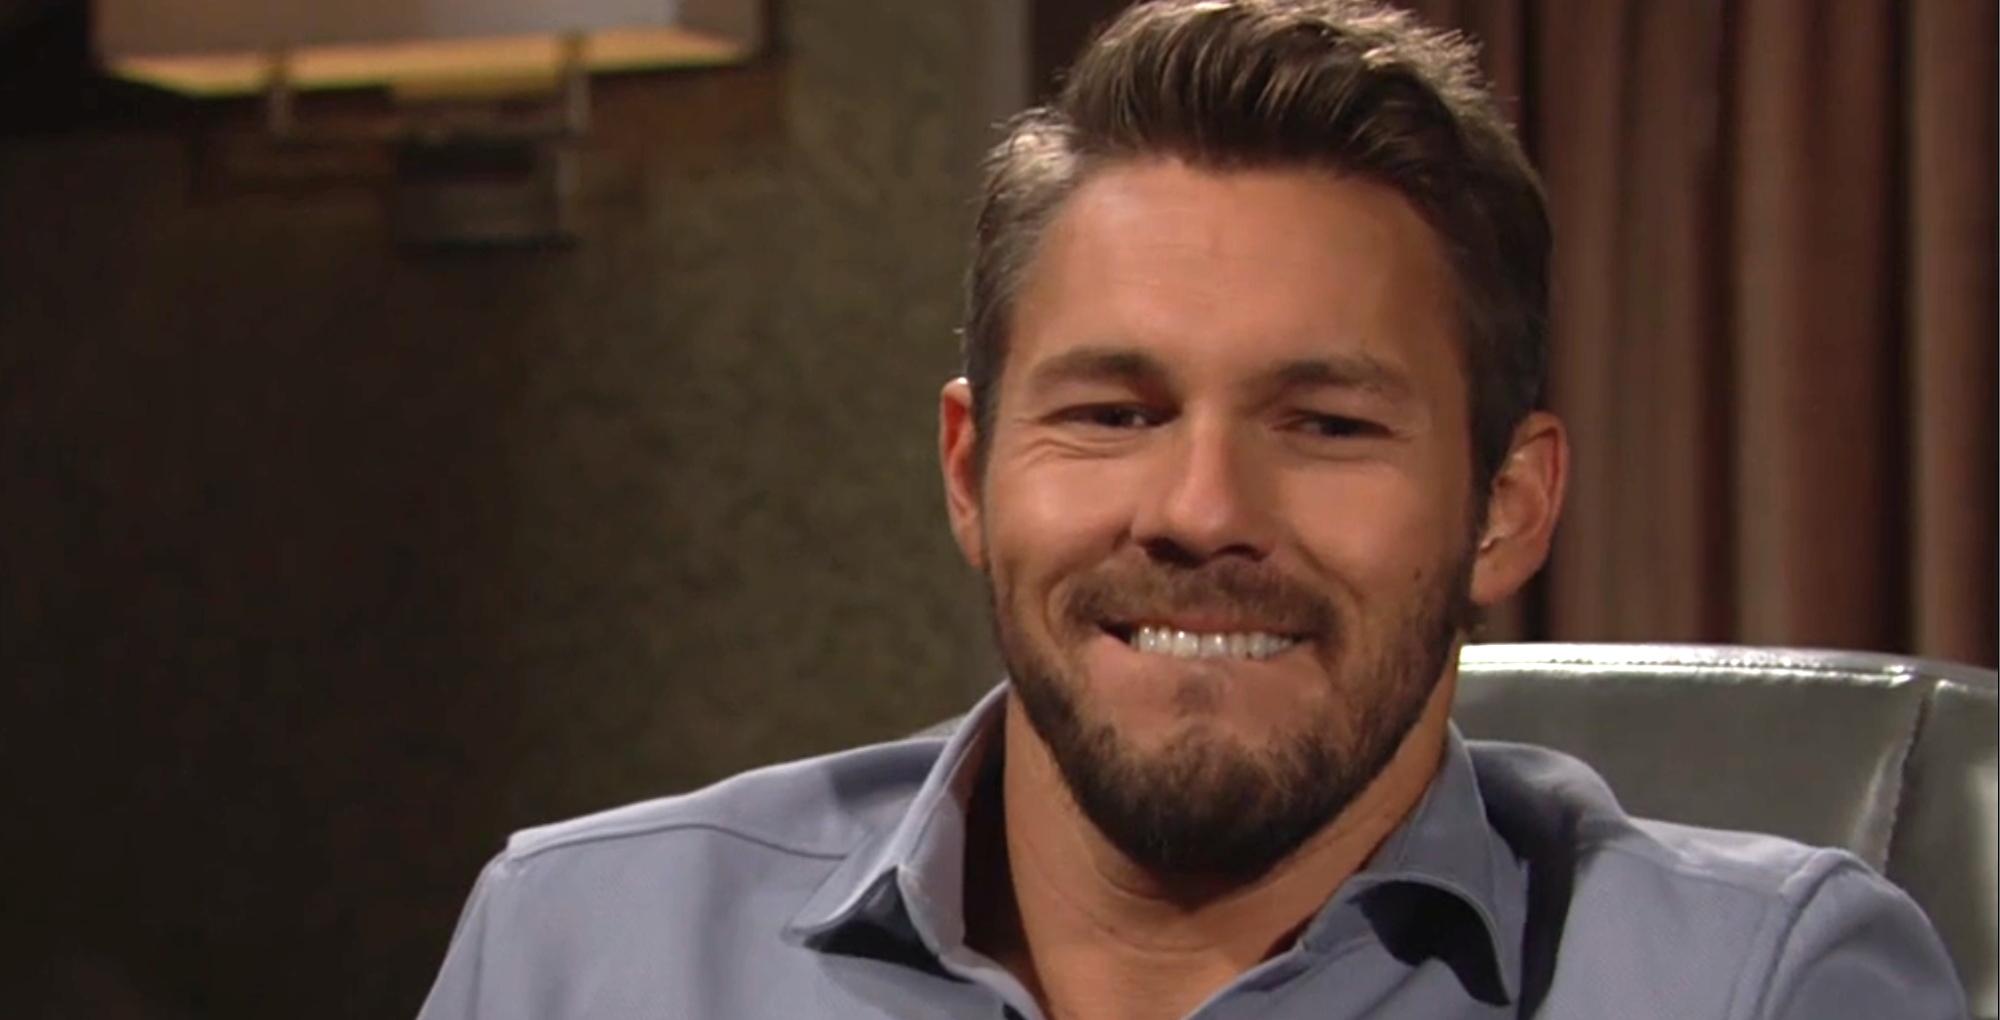 the bold and the beautiful recap for wednesday, june 21, 2023, liam spencer with a big goofy grin.